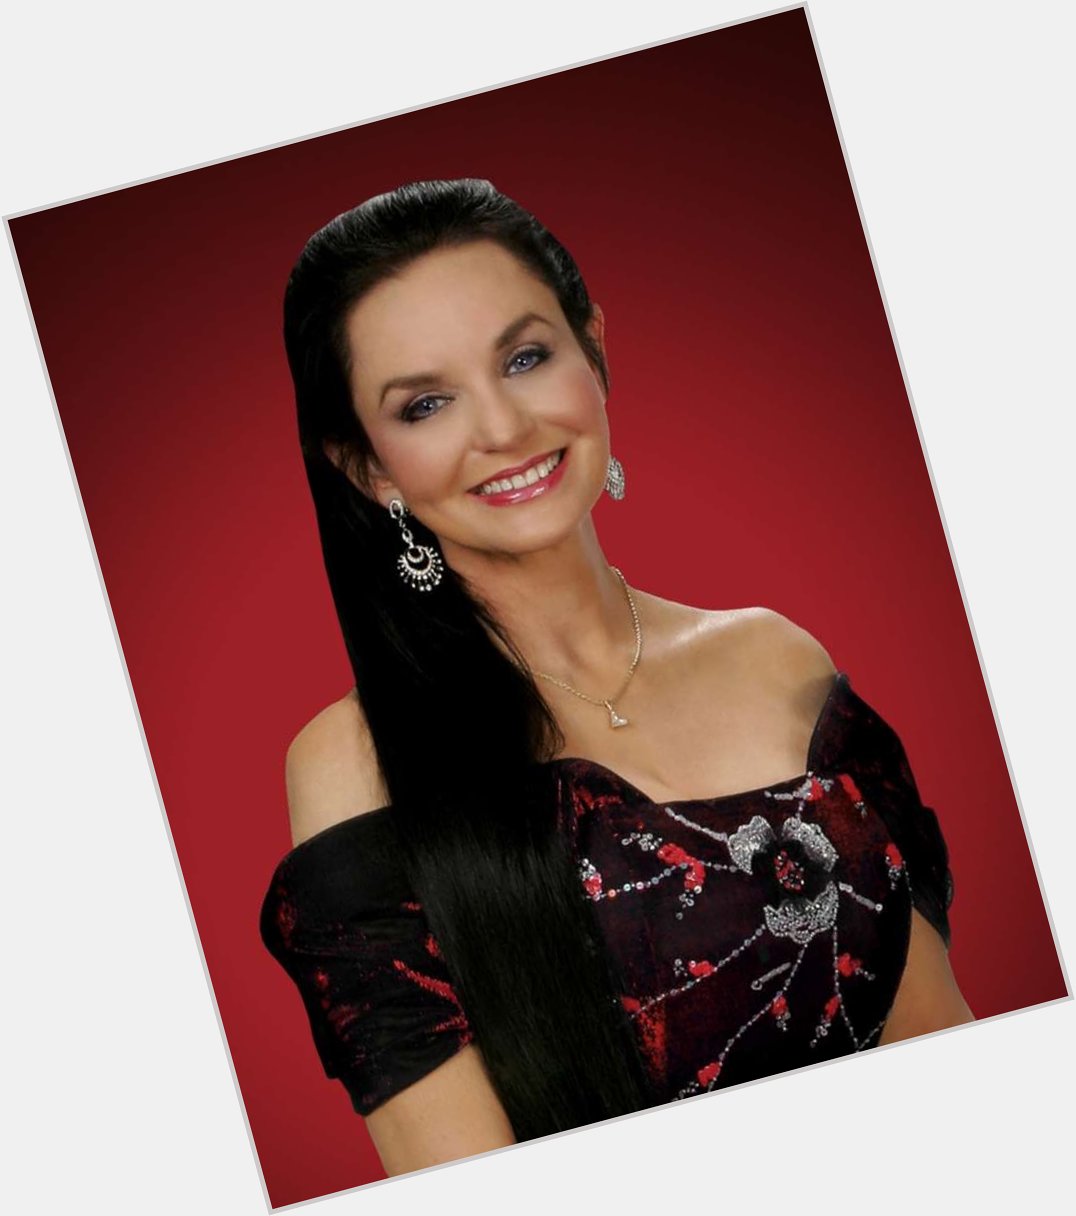 Also Happy Birthday to Crystal Gayle, born today in 1951 